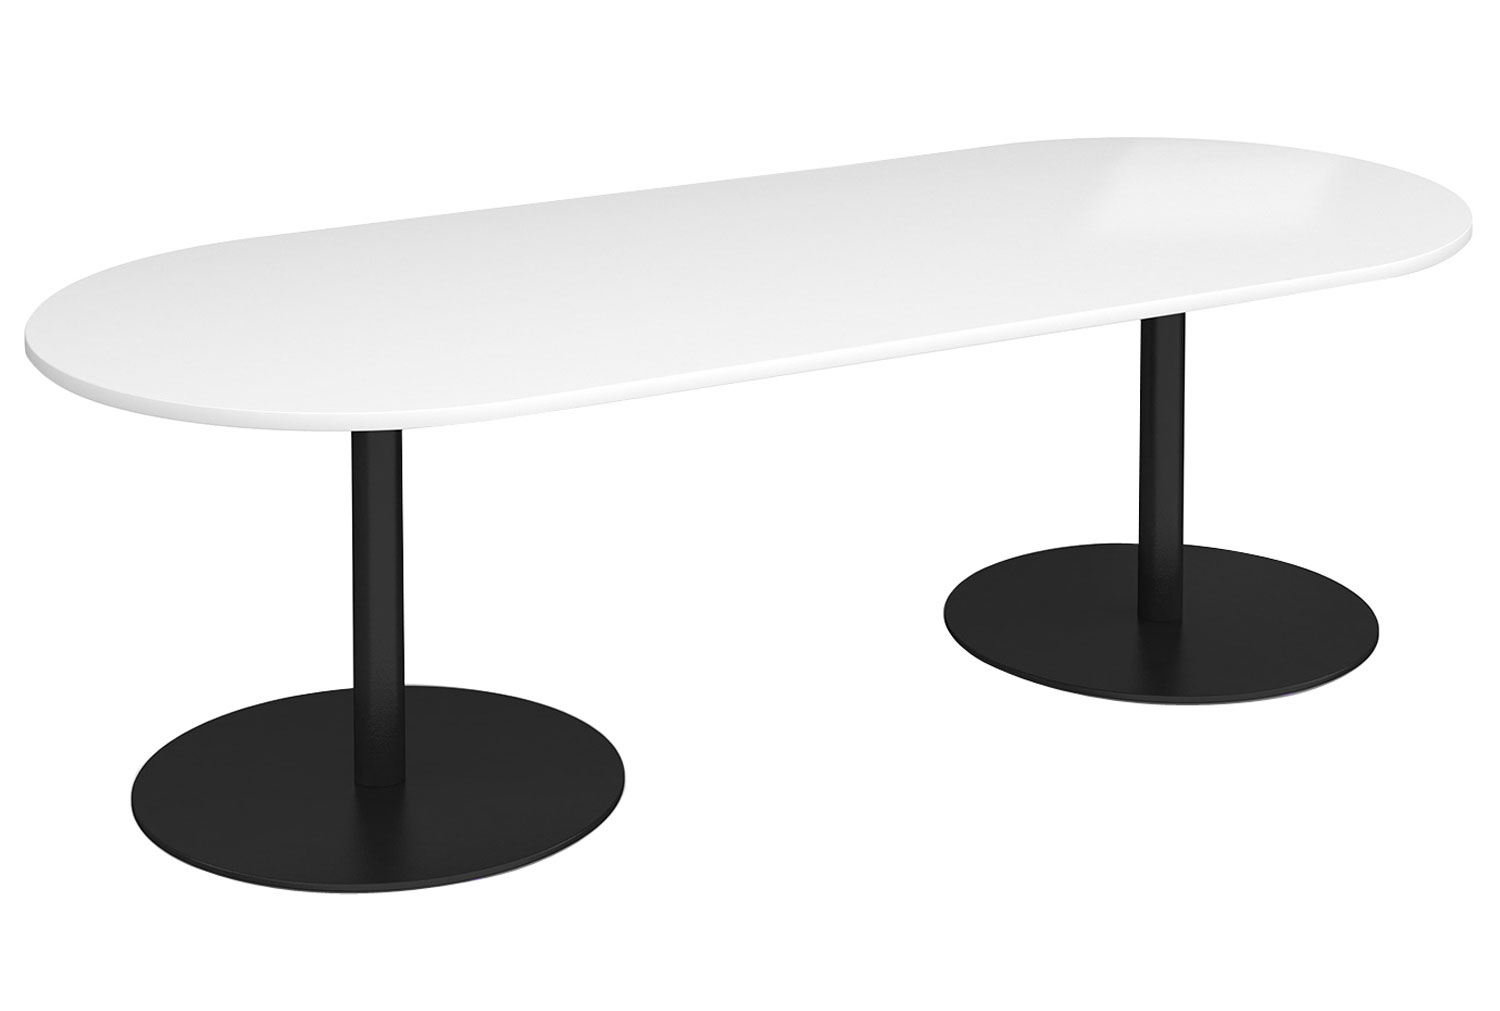 Tasso Radial Boardroom Table, White, Express Delivery